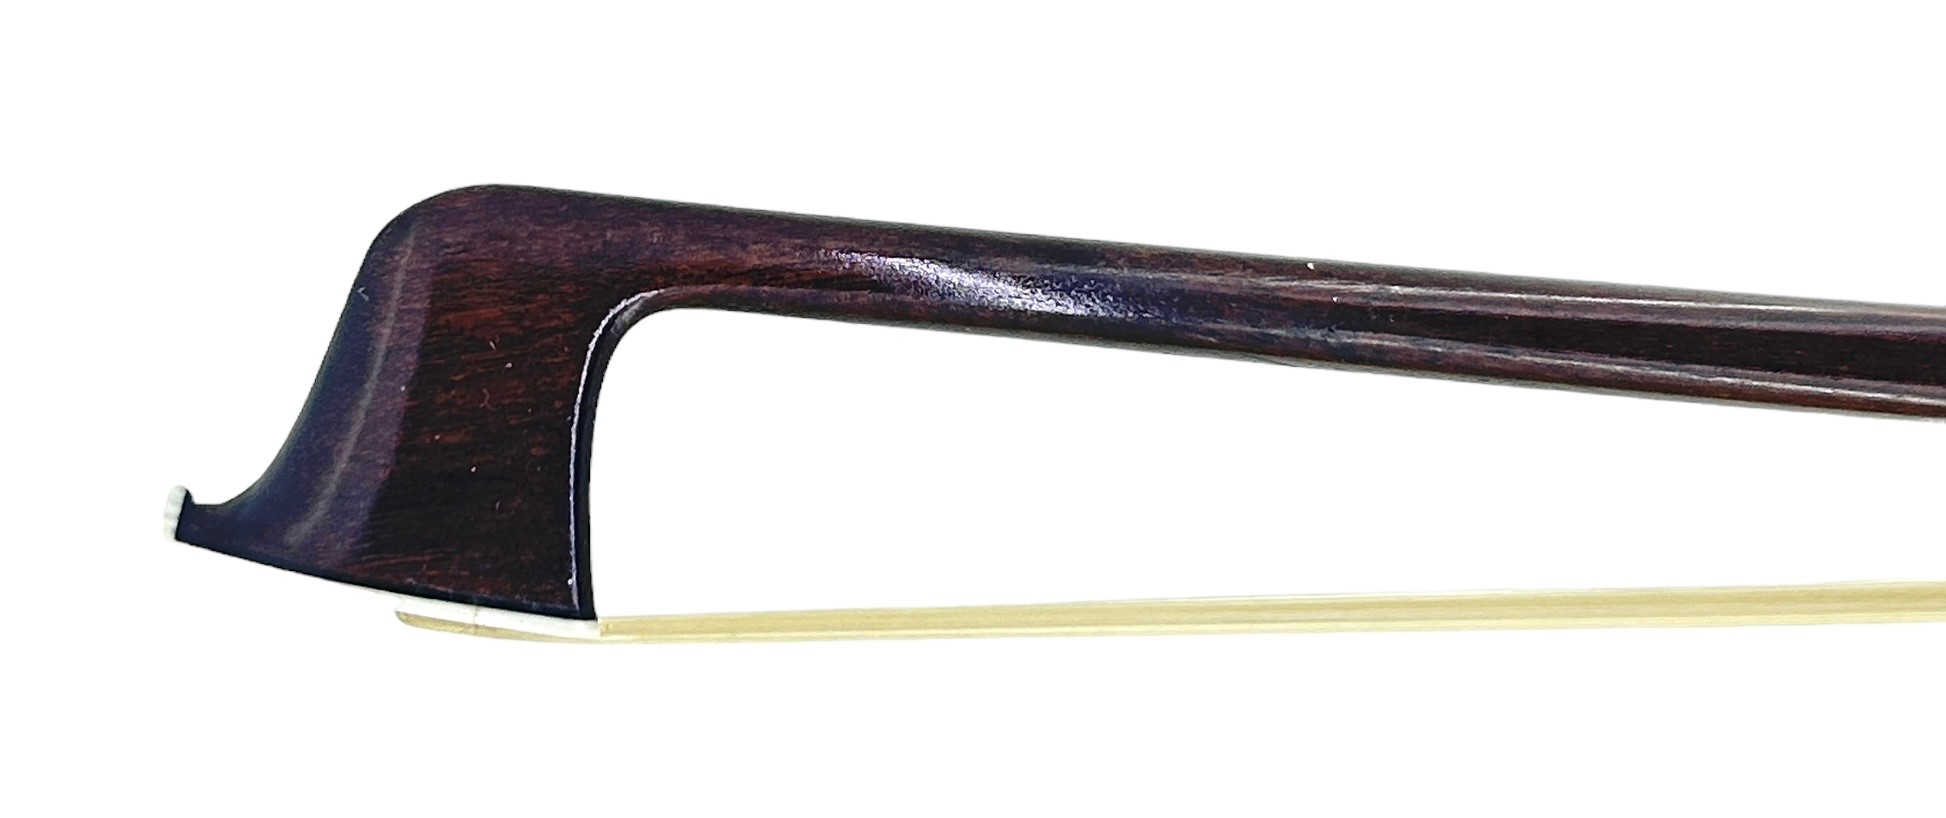 A SILVER MOUNTED VIOLA BOW BY JAMES TUBBS, Stamped 'Jas Tubbs' Round stick Weight: 70gms Repaired - Image 2 of 2